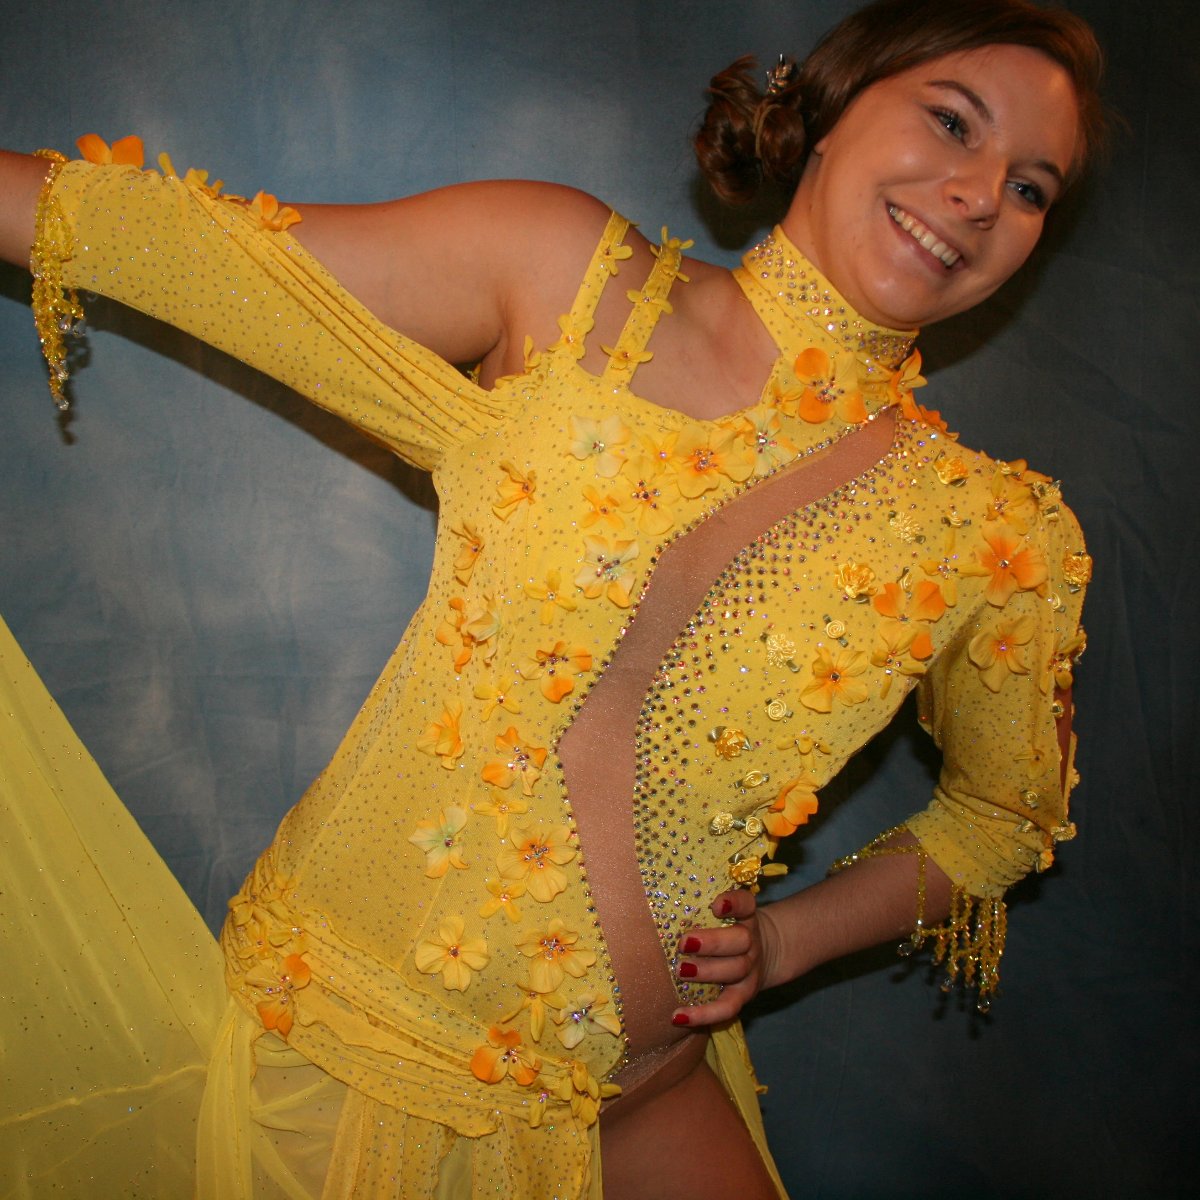 Crystal's Creations close up view of Yellow ballroom dress created in sunny yellow slinky glitterknit with glitter gold flocked yellow chiffon